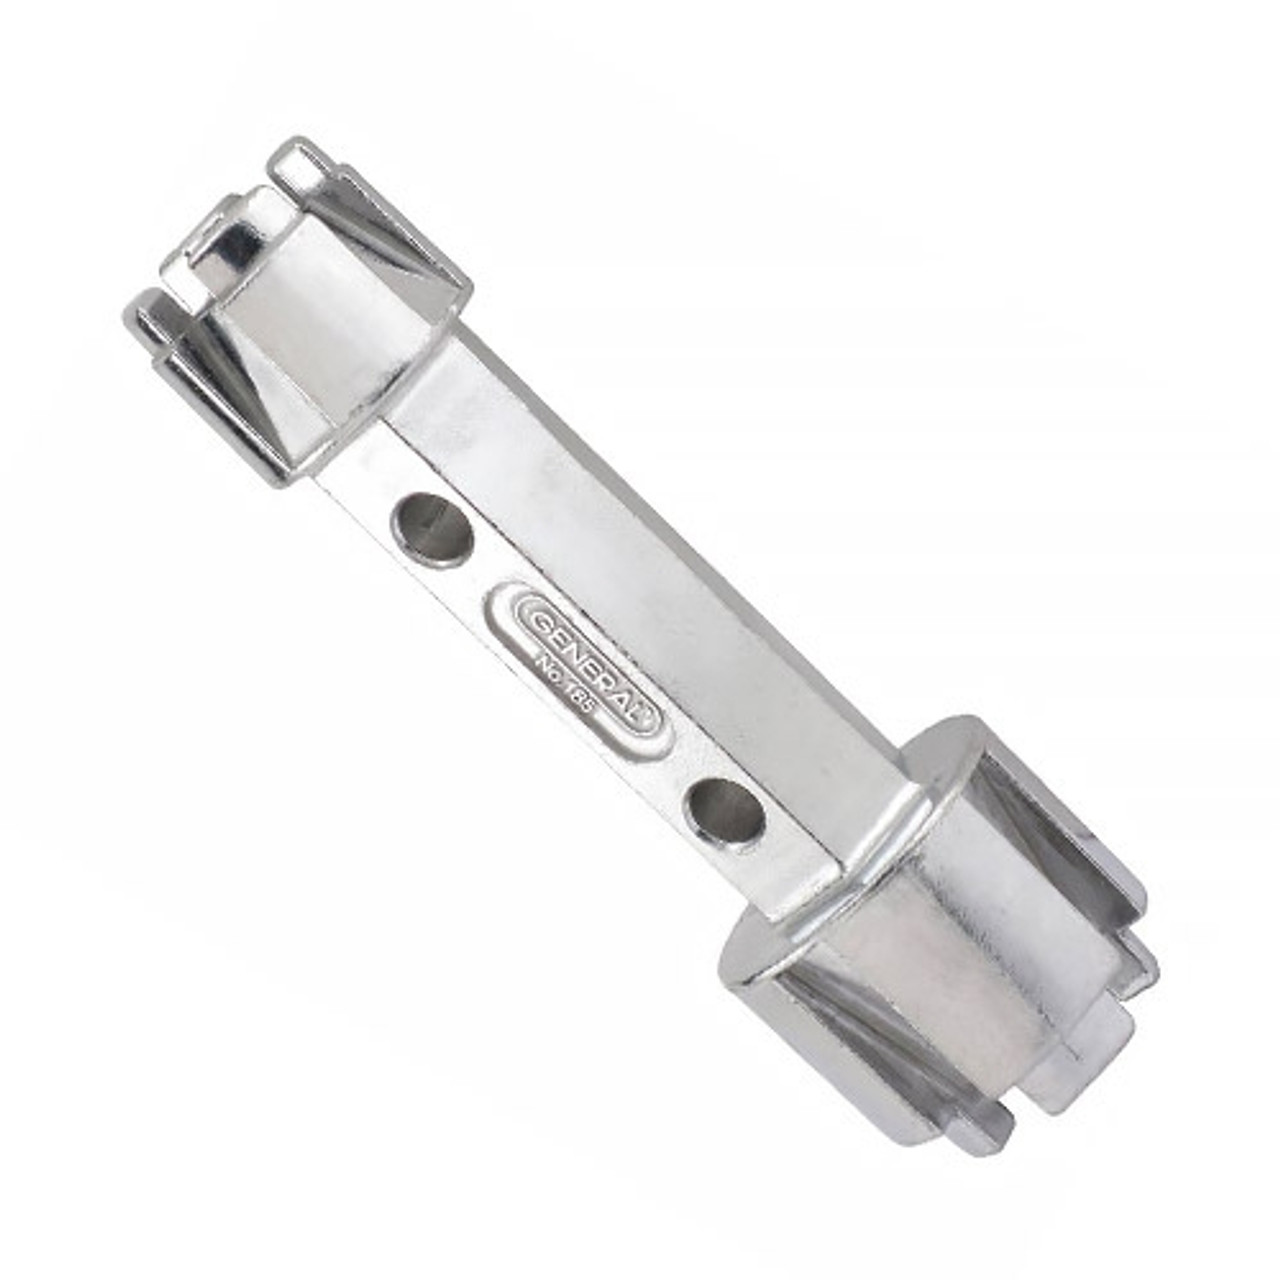 https://cdn11.bigcommerce.com/s-v3p1uerro5/images/stencil/1280x1280/products/25498/35071/gen-185-double-end-tub-drain-wrench-mfg__18580.1674691268.jpg?c=1